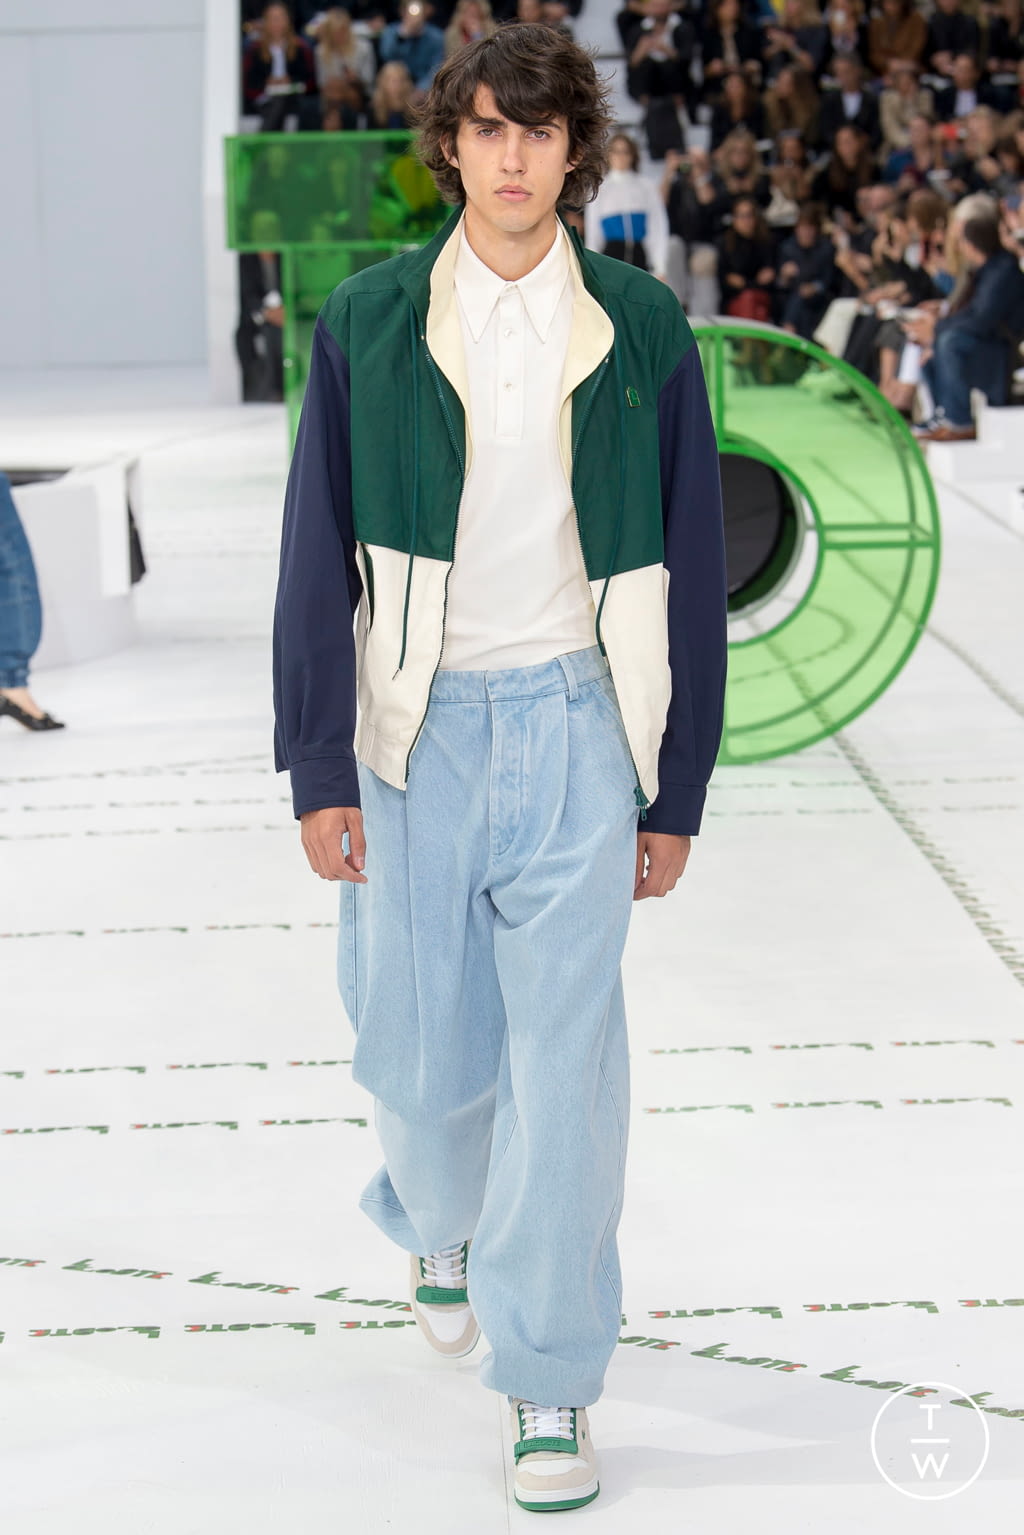 lacoste spring summer 2018